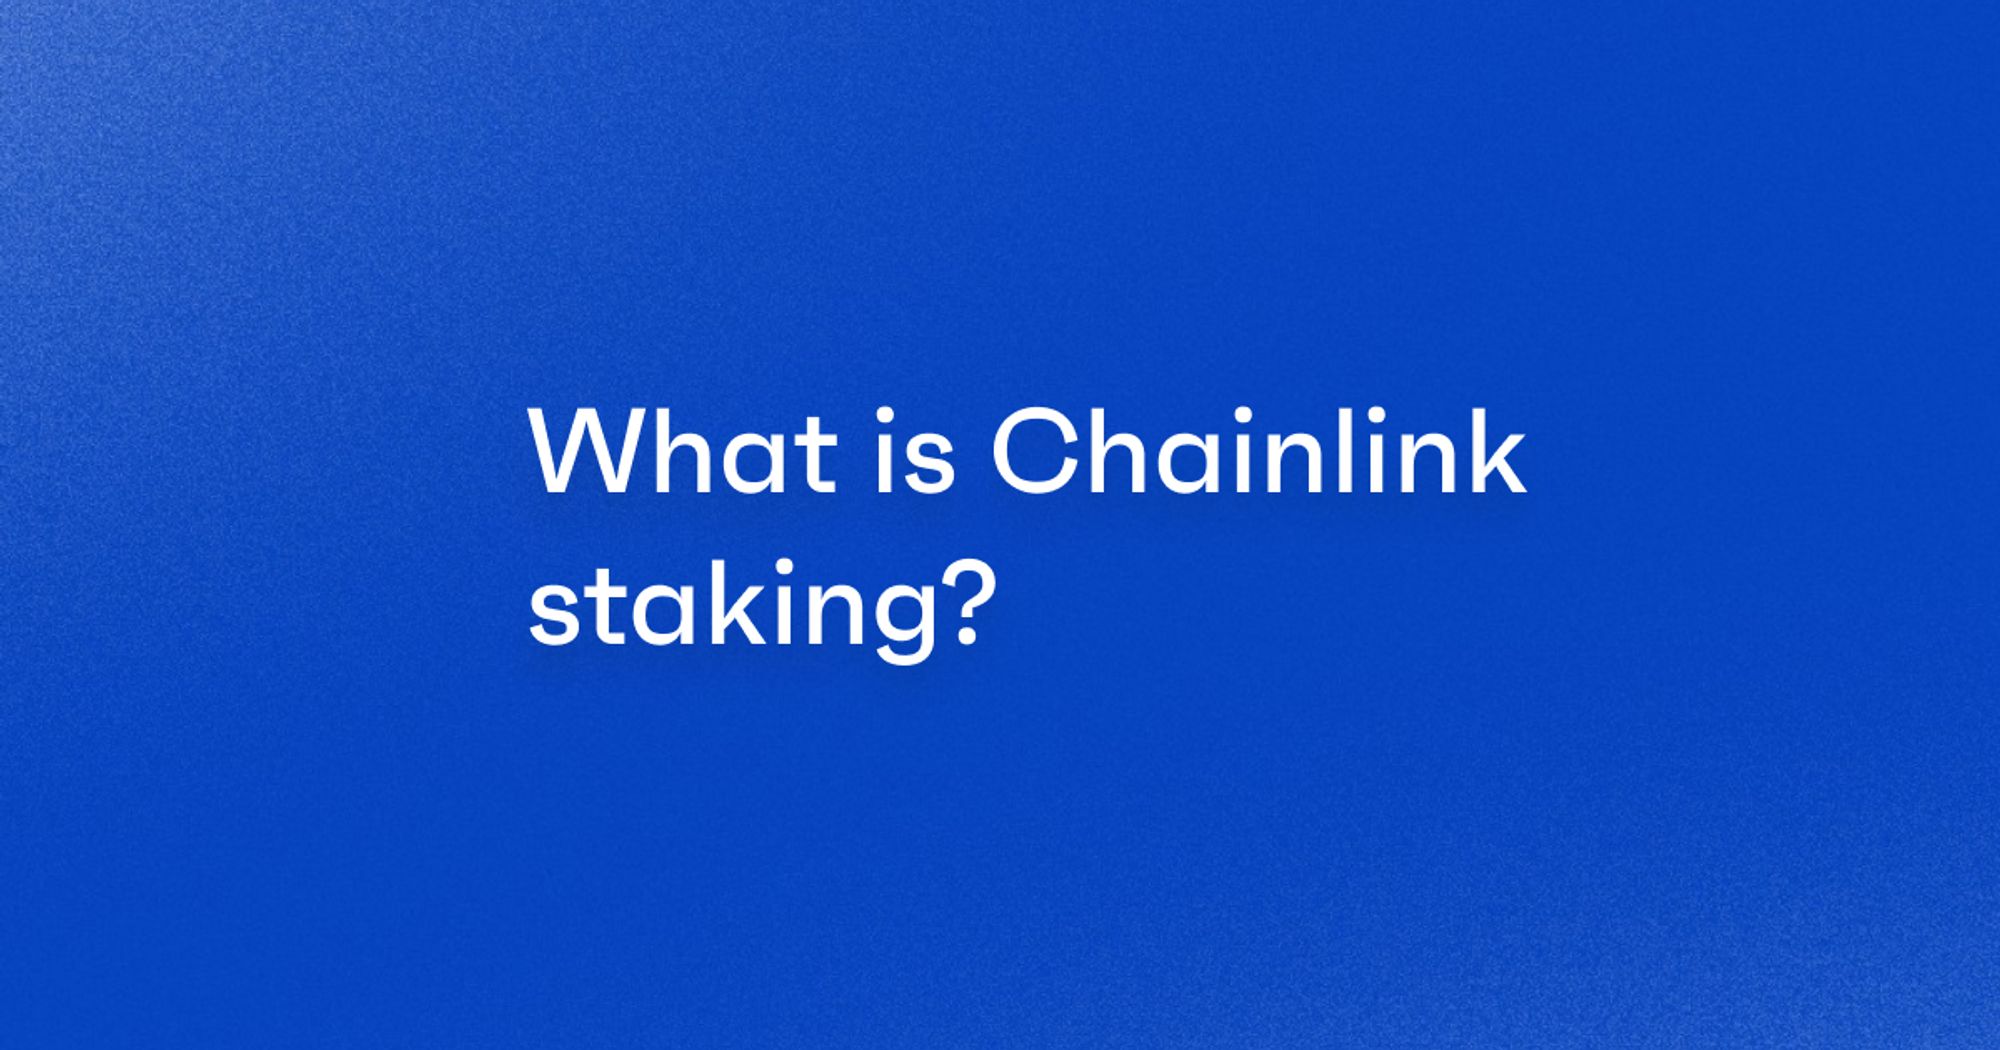 What is Chainlink staking? blog cover image